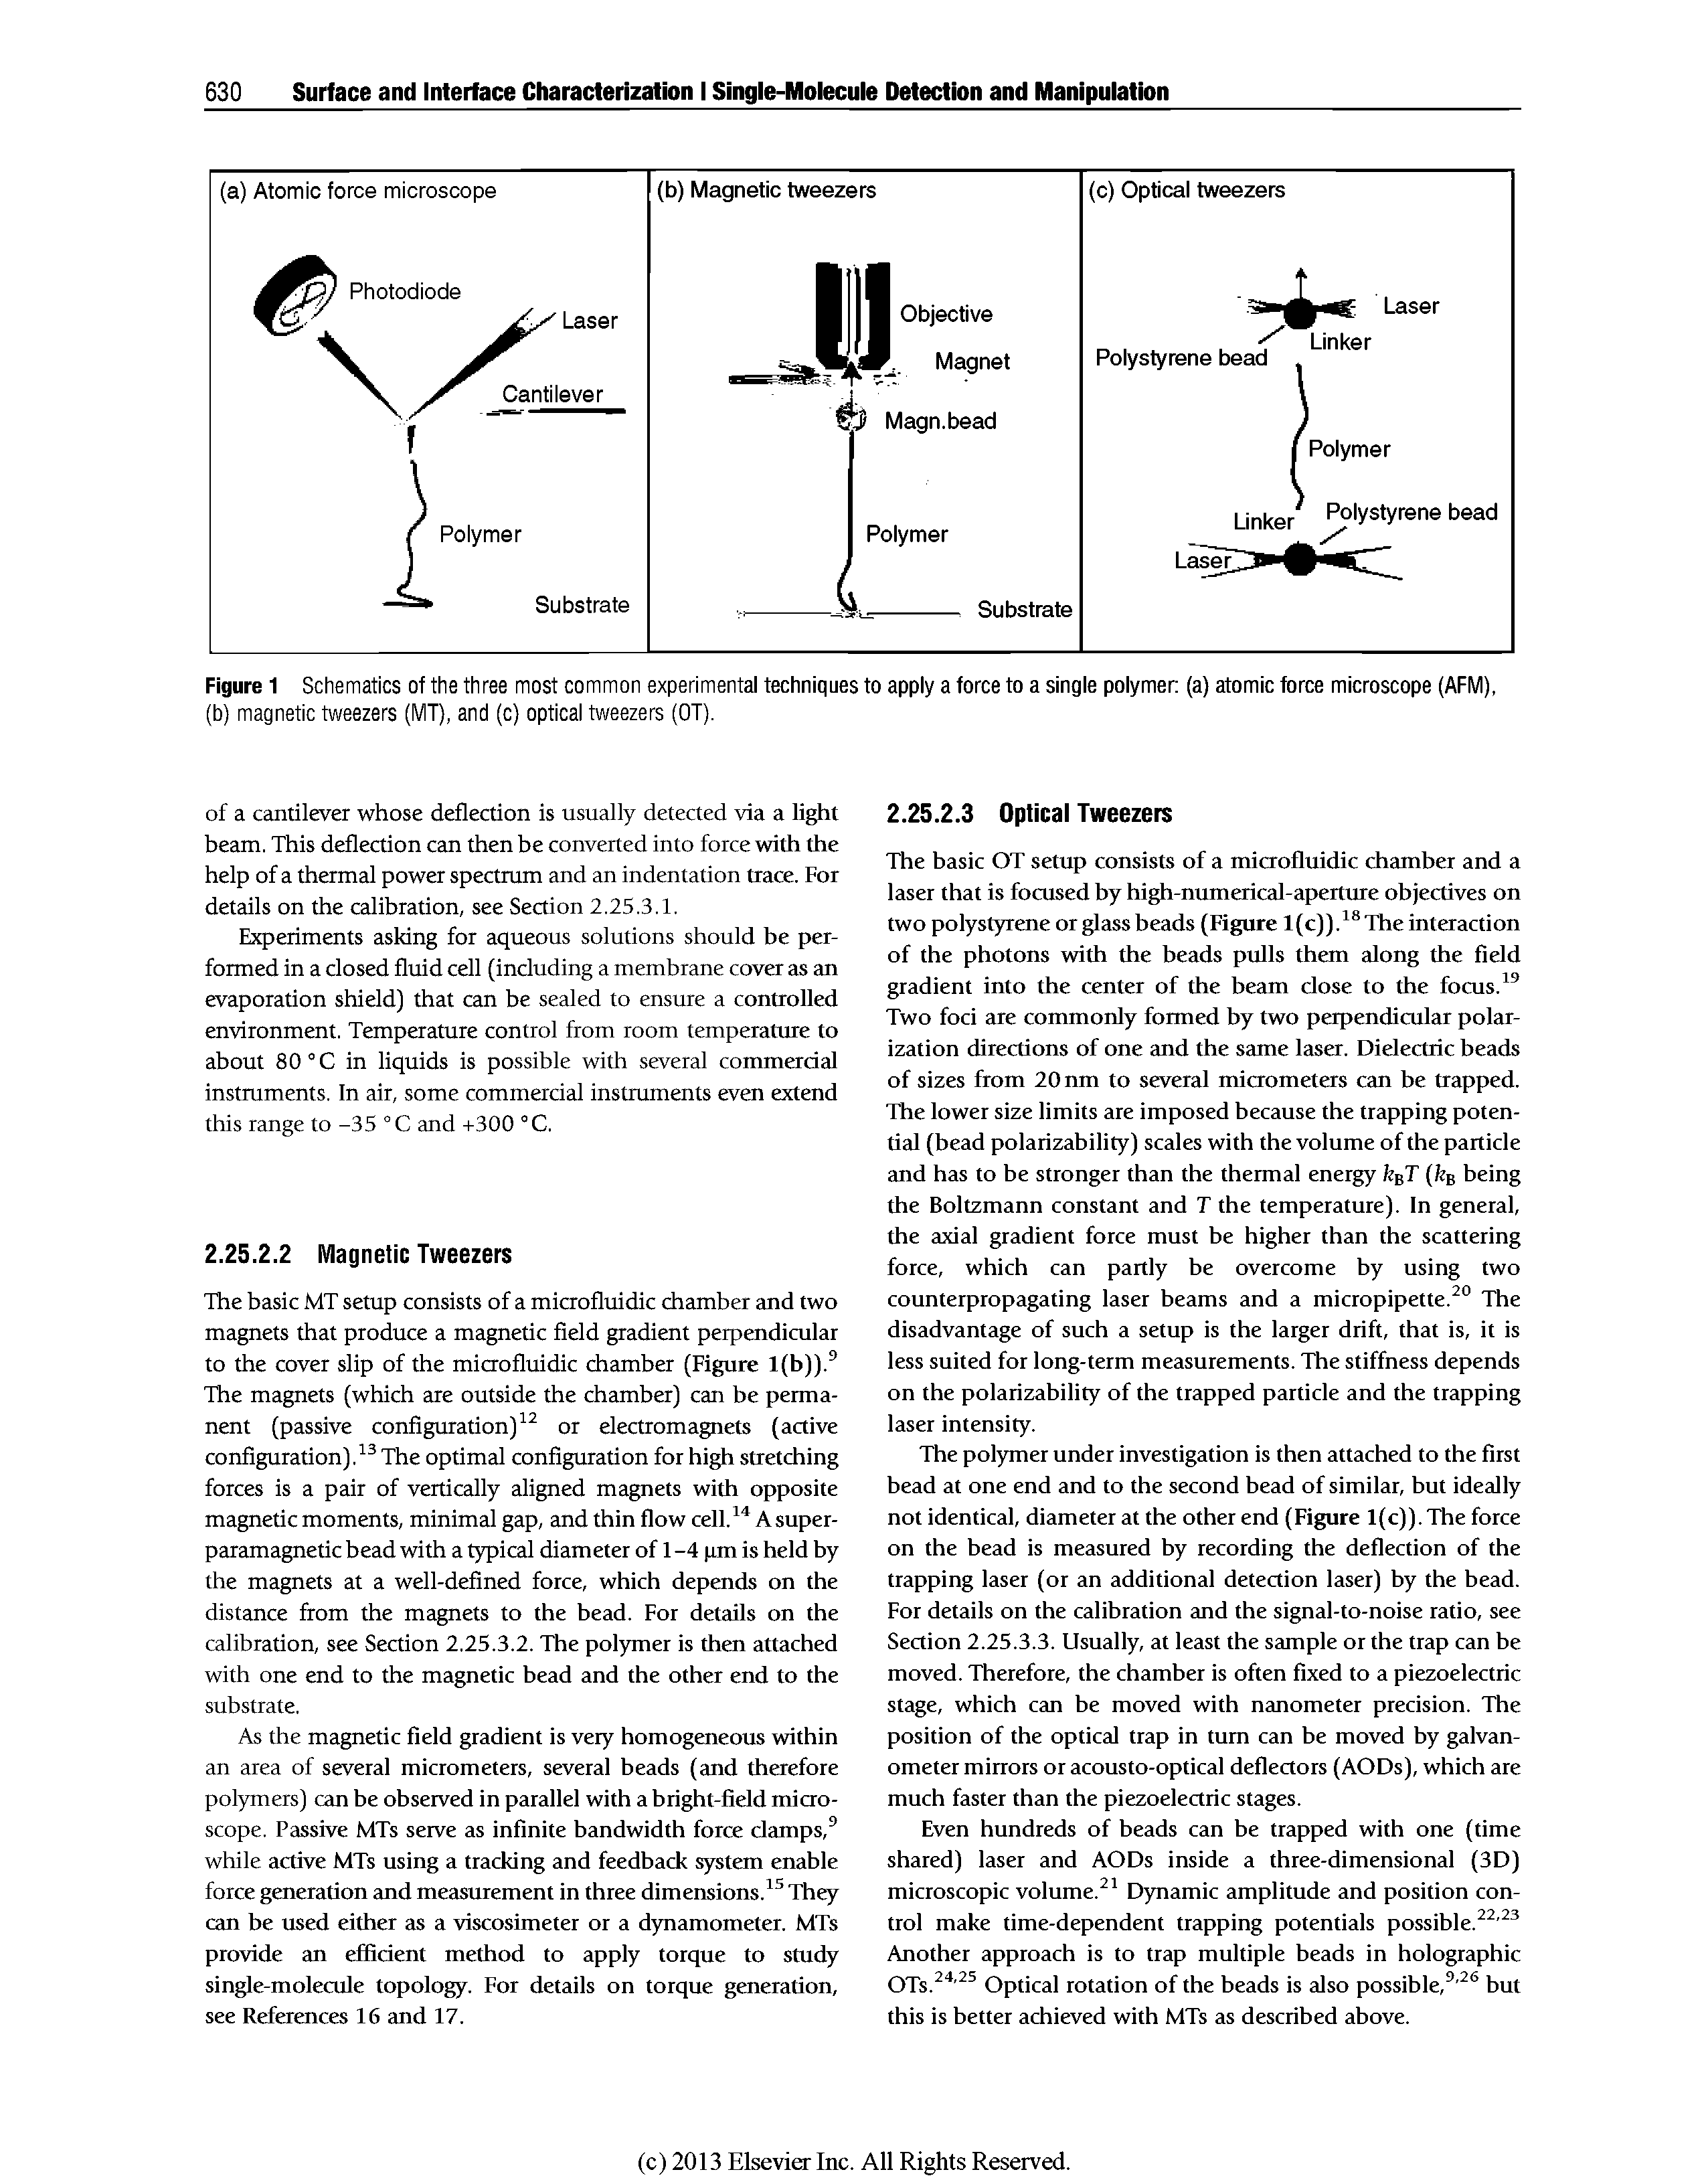 Figure 1 Schematics of the three most common experimental techniques to apply a force to a single polymer (a) atomic force microscope (AFM),...